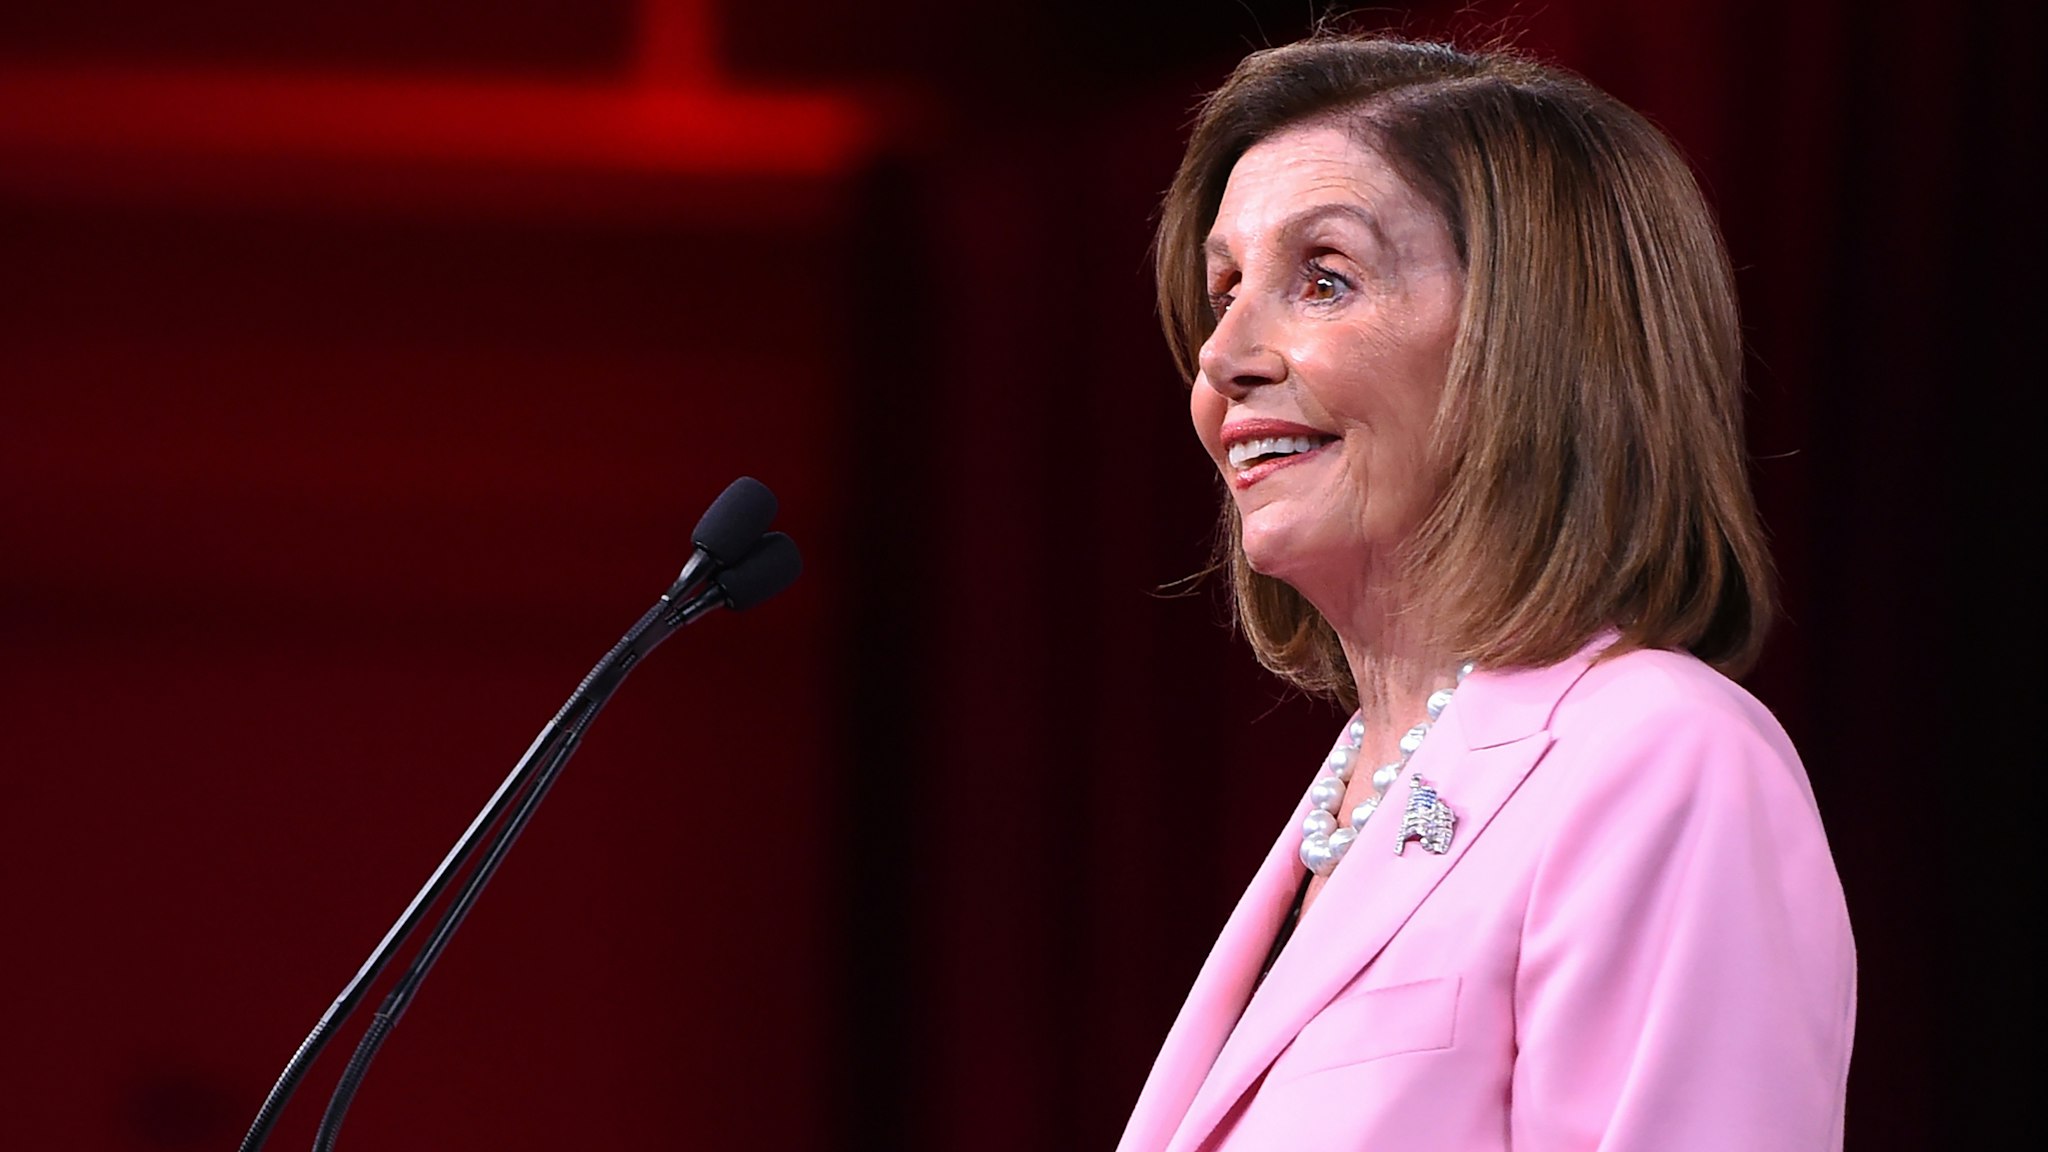 Speaker of the US House of Representatives Nancy Pelosi speaks on-stage during the Democratic National Committee's summer meeting in San Francisco, California on August 23, 2019.